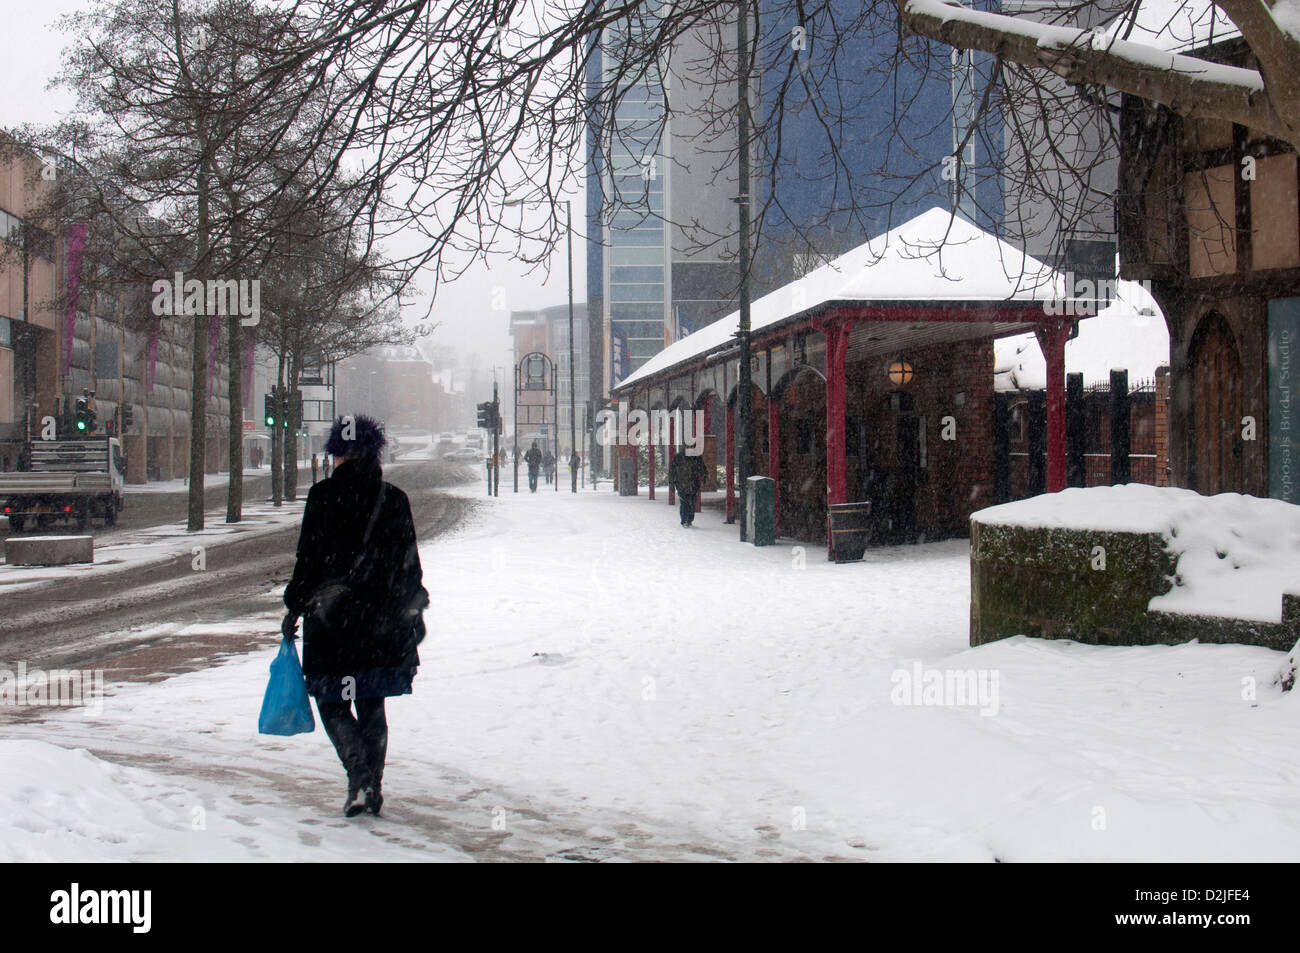 City centre in snowy weather, Coventry, UK Stock Photo